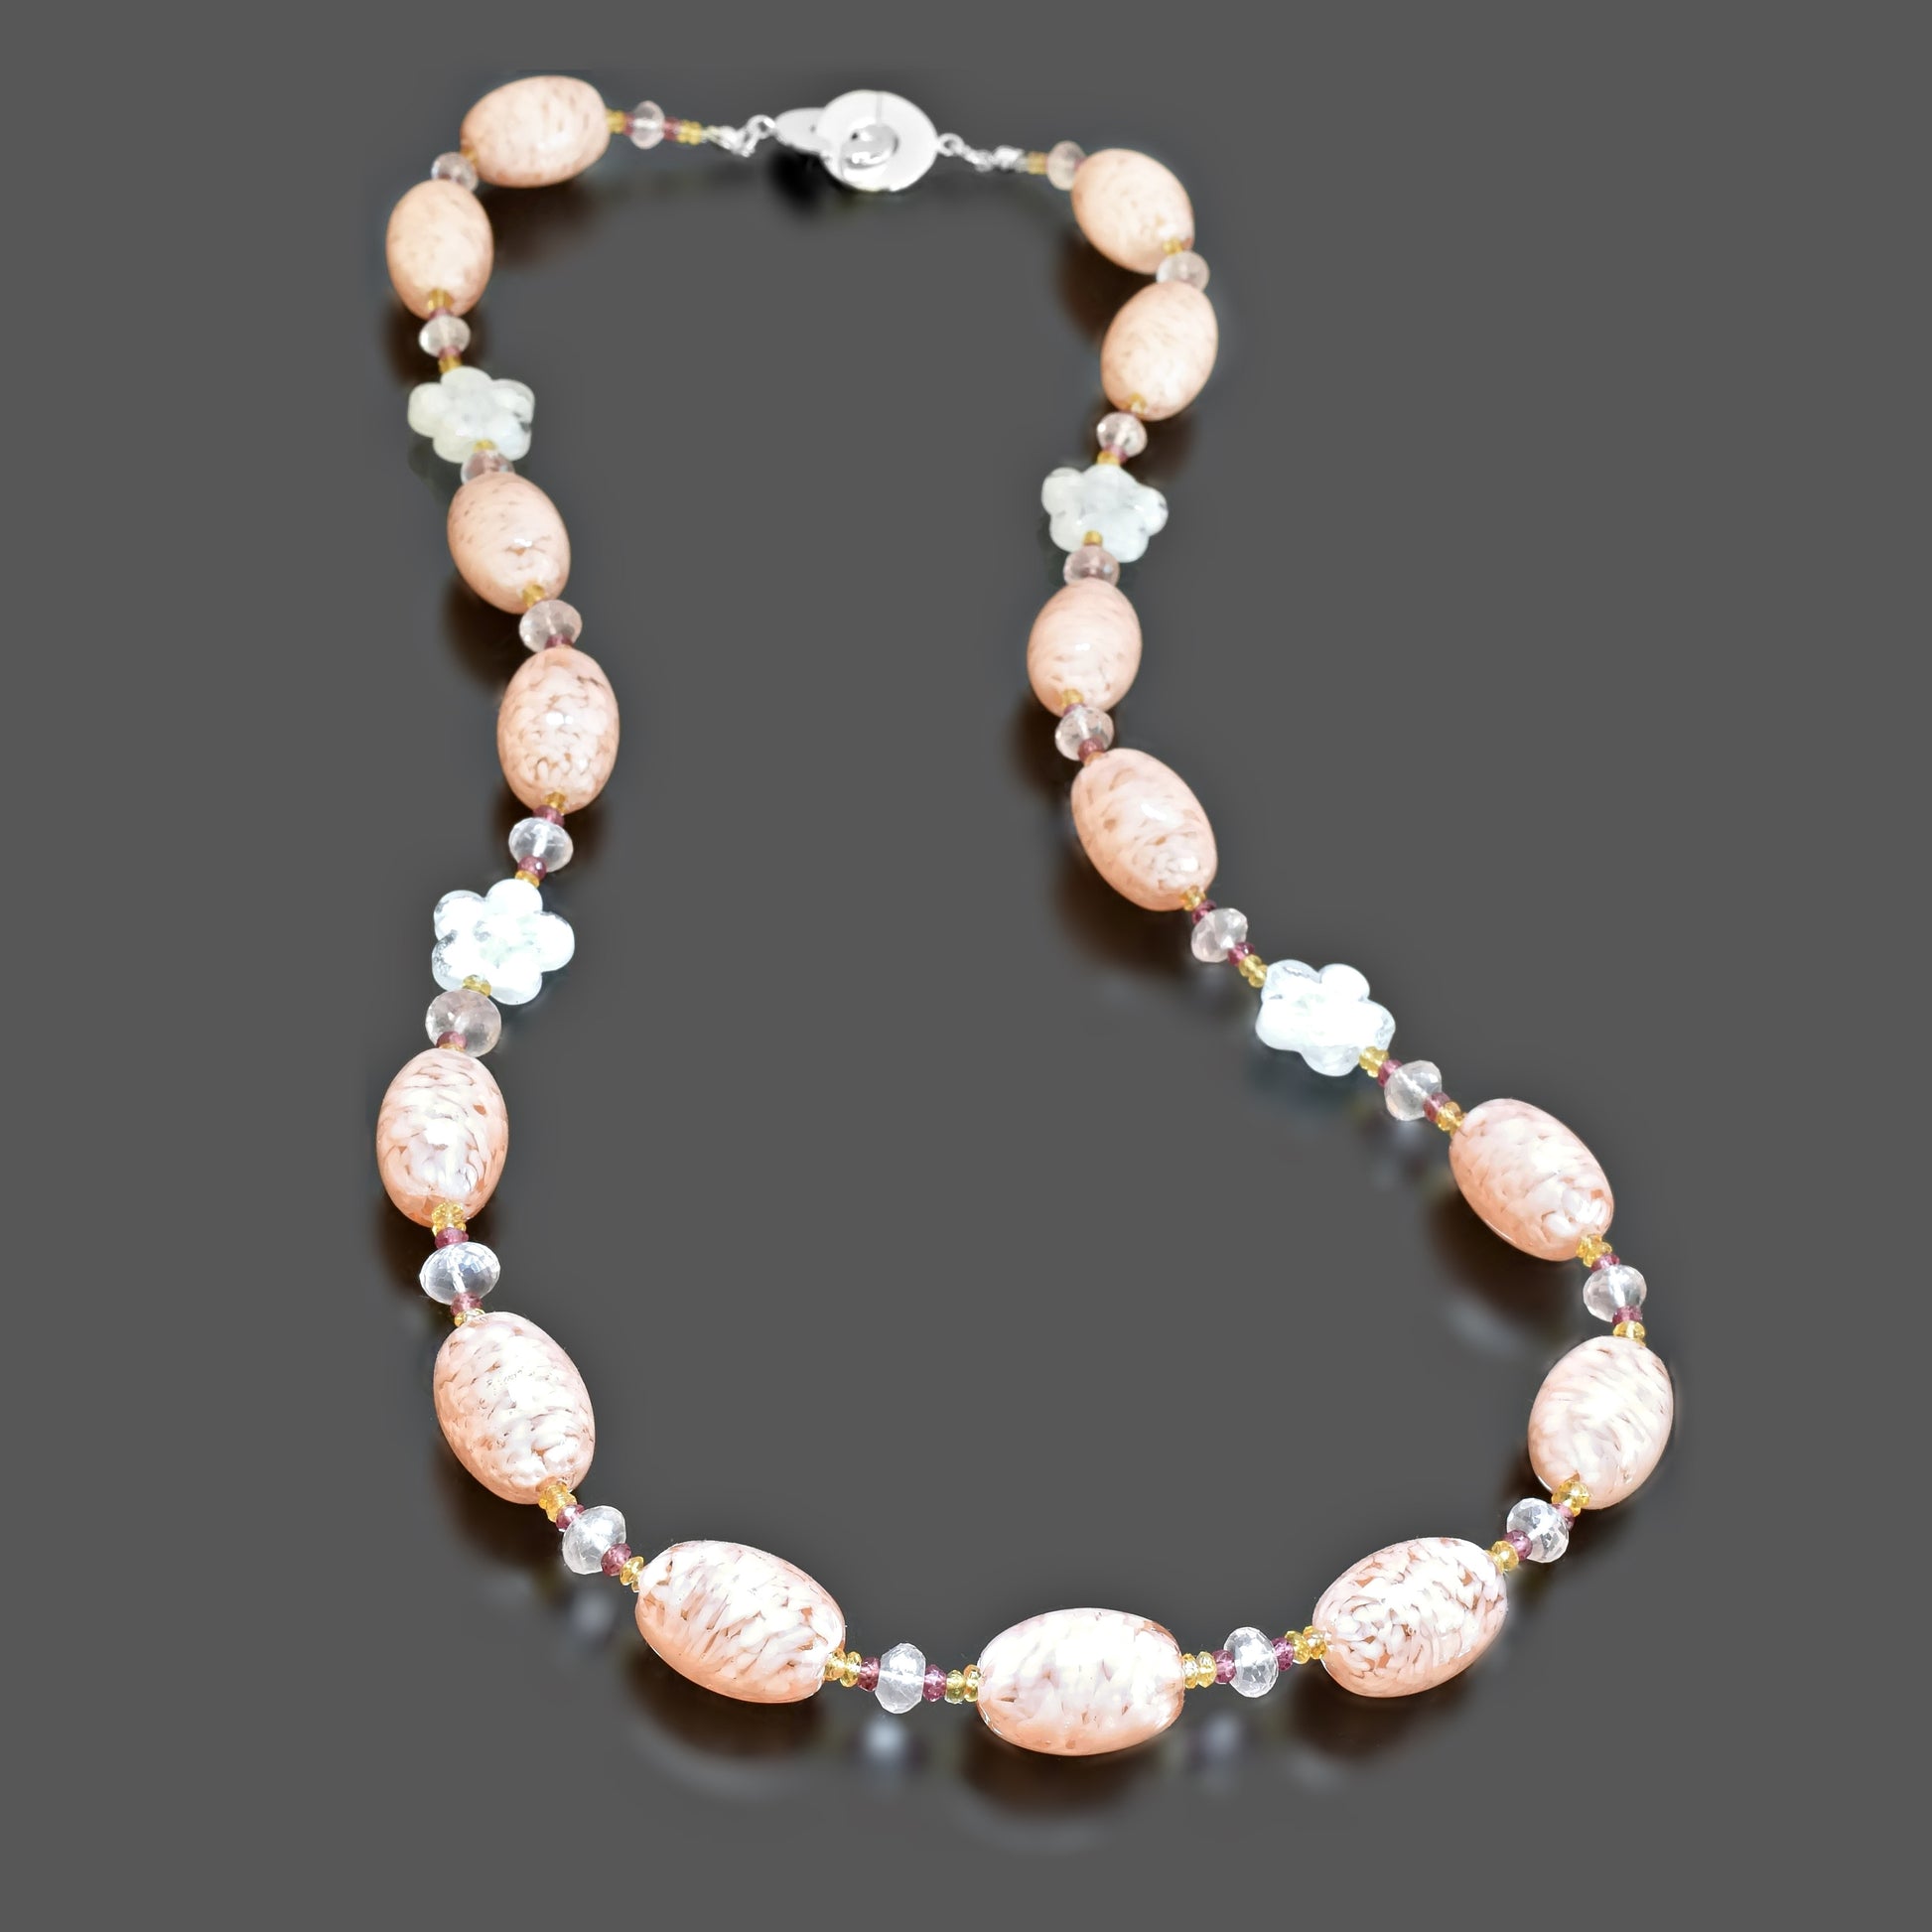 Pink Beaded Murano Glass Necklace with Flowers, Citrine, Garnet, Rose Quartz Sterling Silver 